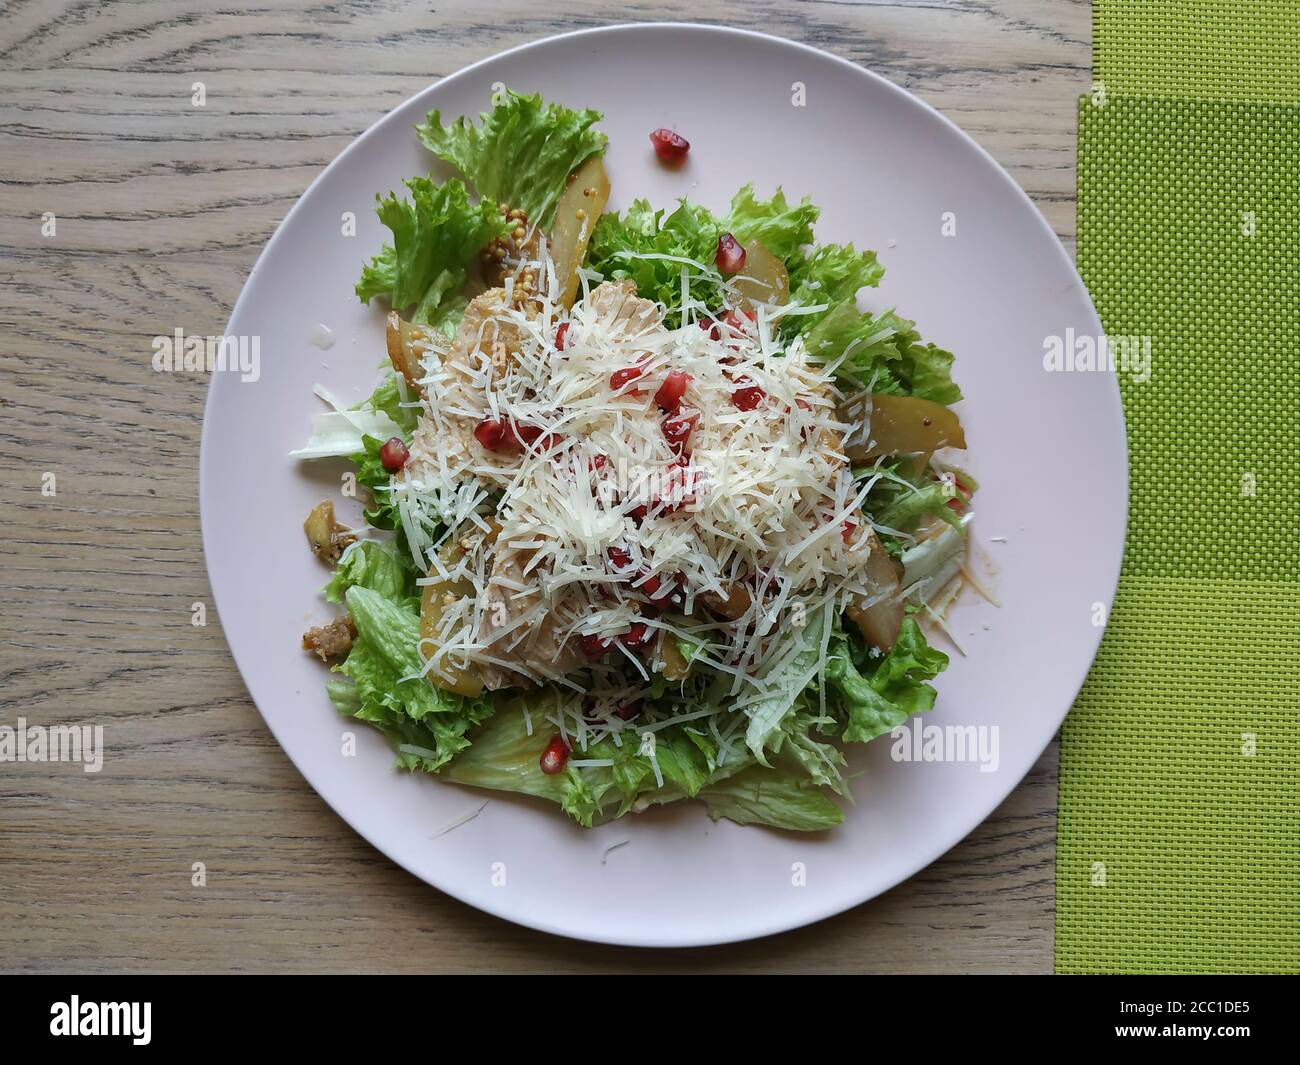 https://c8.alamy.com/comp/2CC1DE5/nice-salad-salad-mix-with-turkey-fillet-with-pear-and-pomegranate-seeds-sprinkled-with-parmesan-cheese-2CC1DE5.jpg